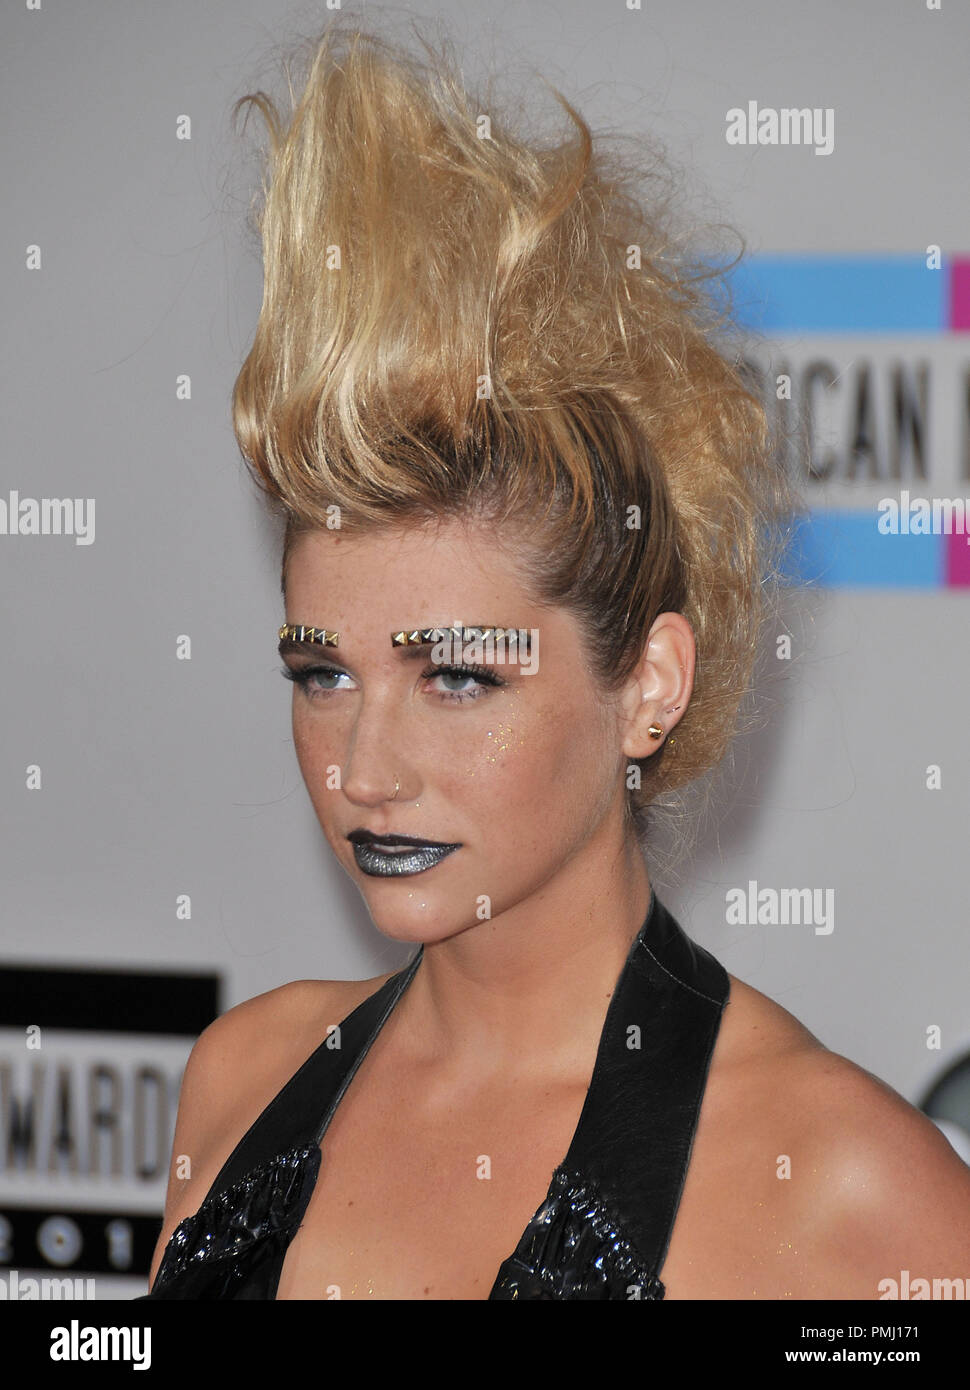 Ke$ha at the 2010 American Music Awards - Arrivals held at the Nokia Theatre L.A. Live in Los Angeles, CA. The event took place on Sunday, November 21, 2010. Photo by PRPP Pacific Rim Photo Press. File Reference # 30722 213PLX   For Editorial Use Only -  All Rights Reserved Stock Photo